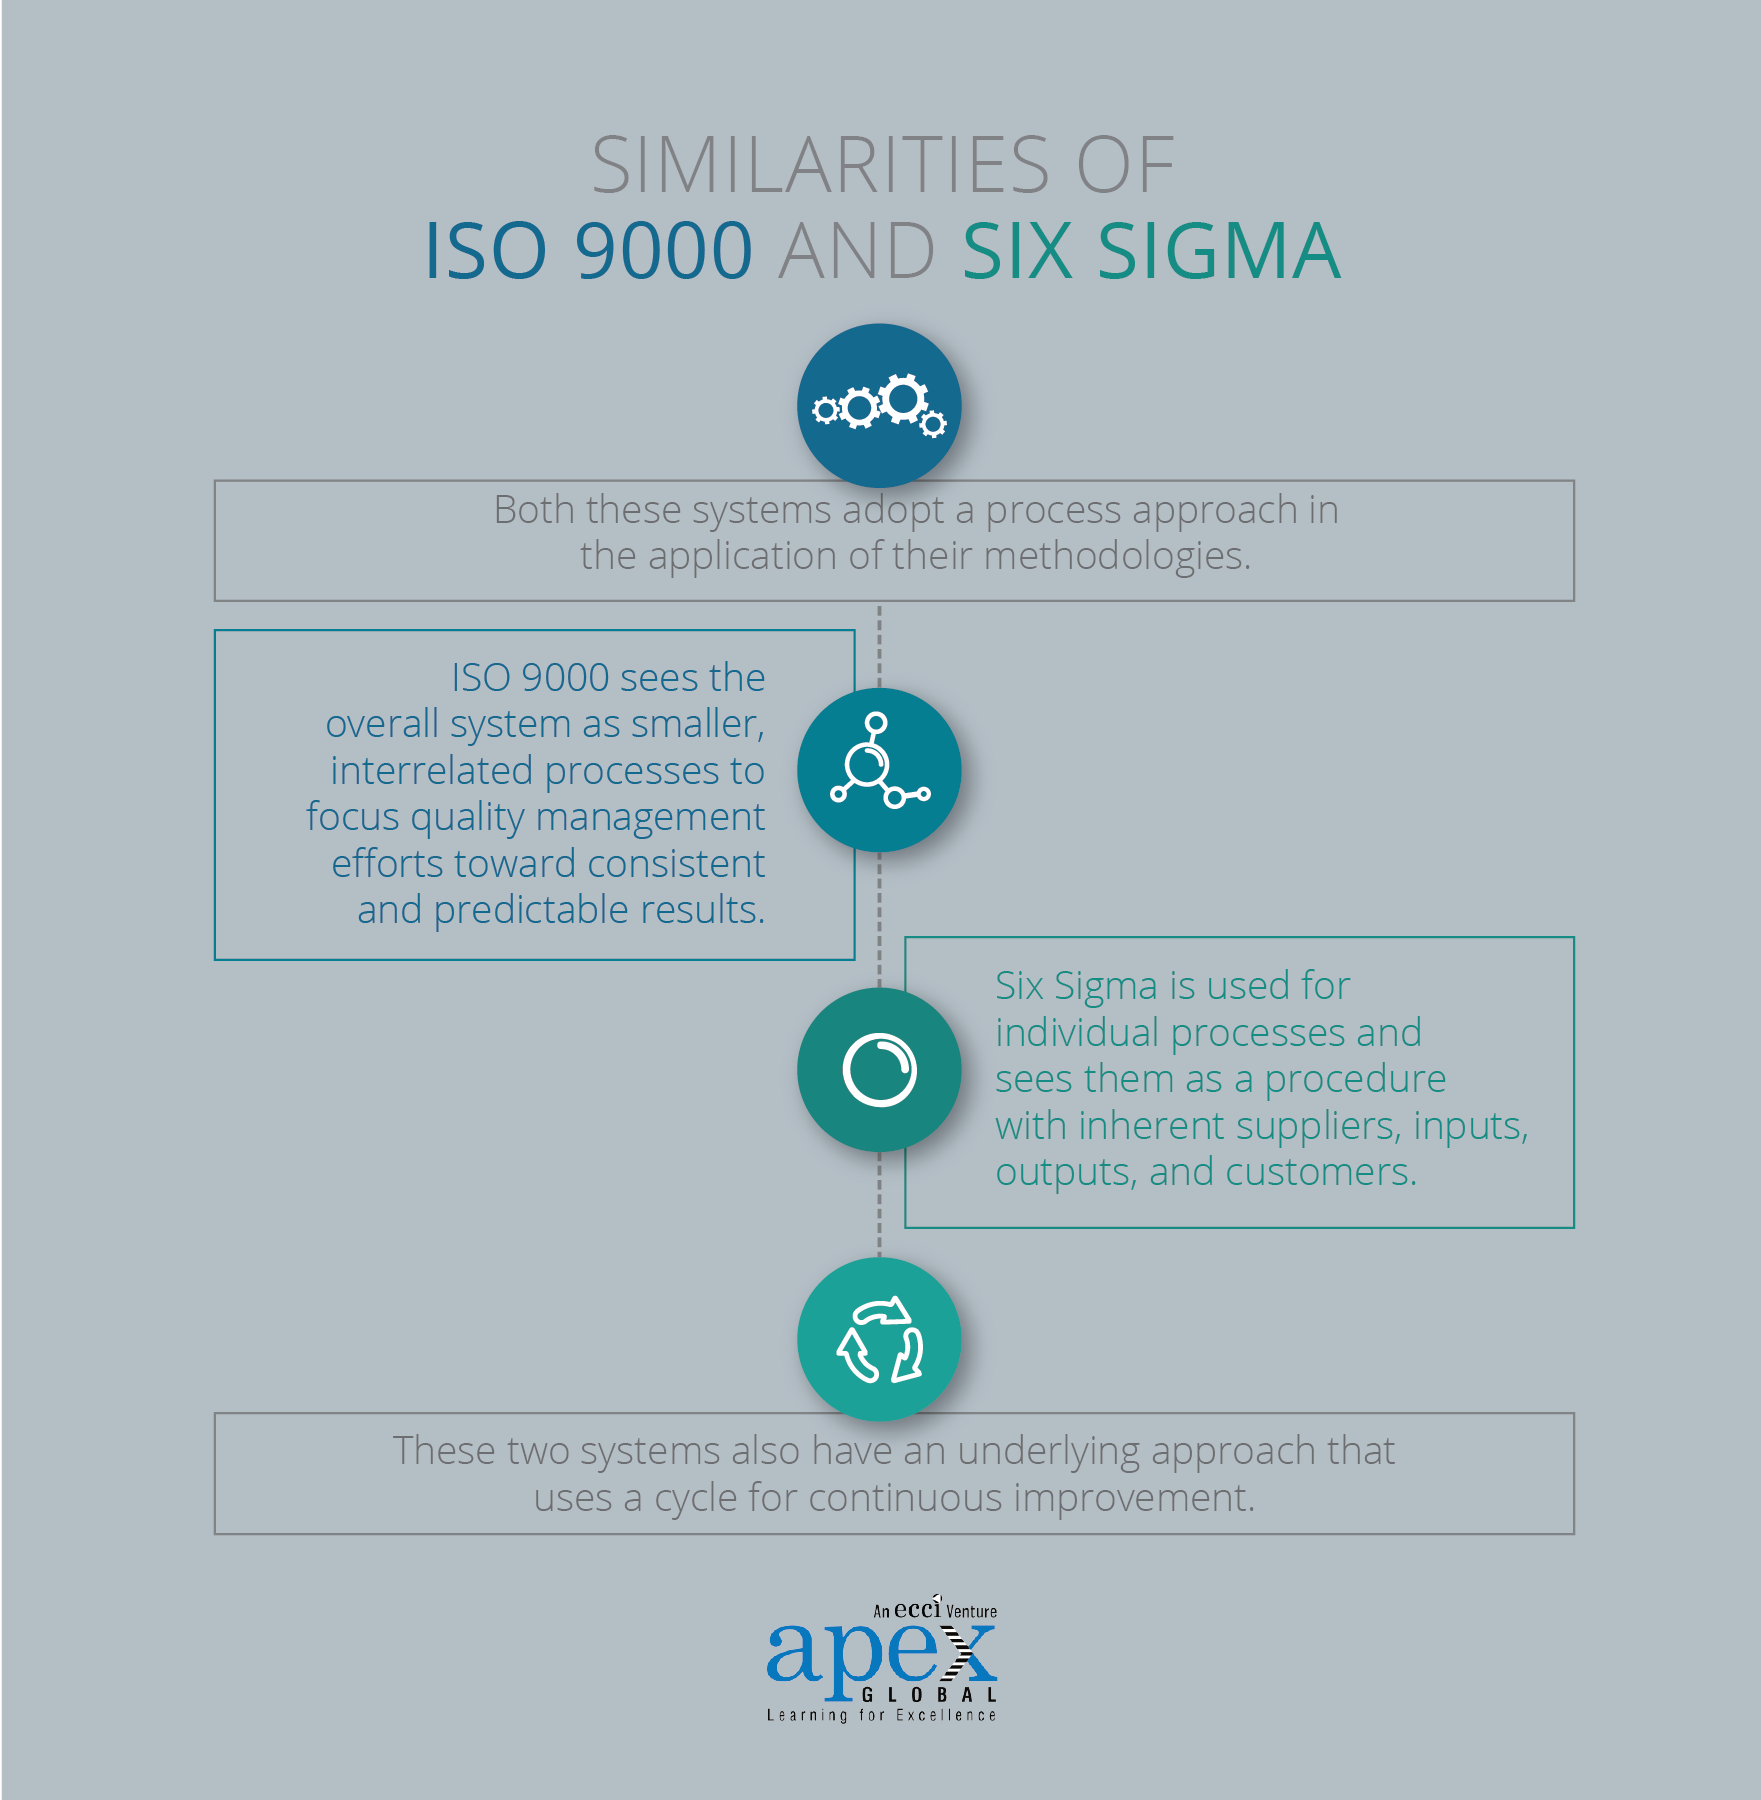 Comparing ISO 9001 and Six Sigma